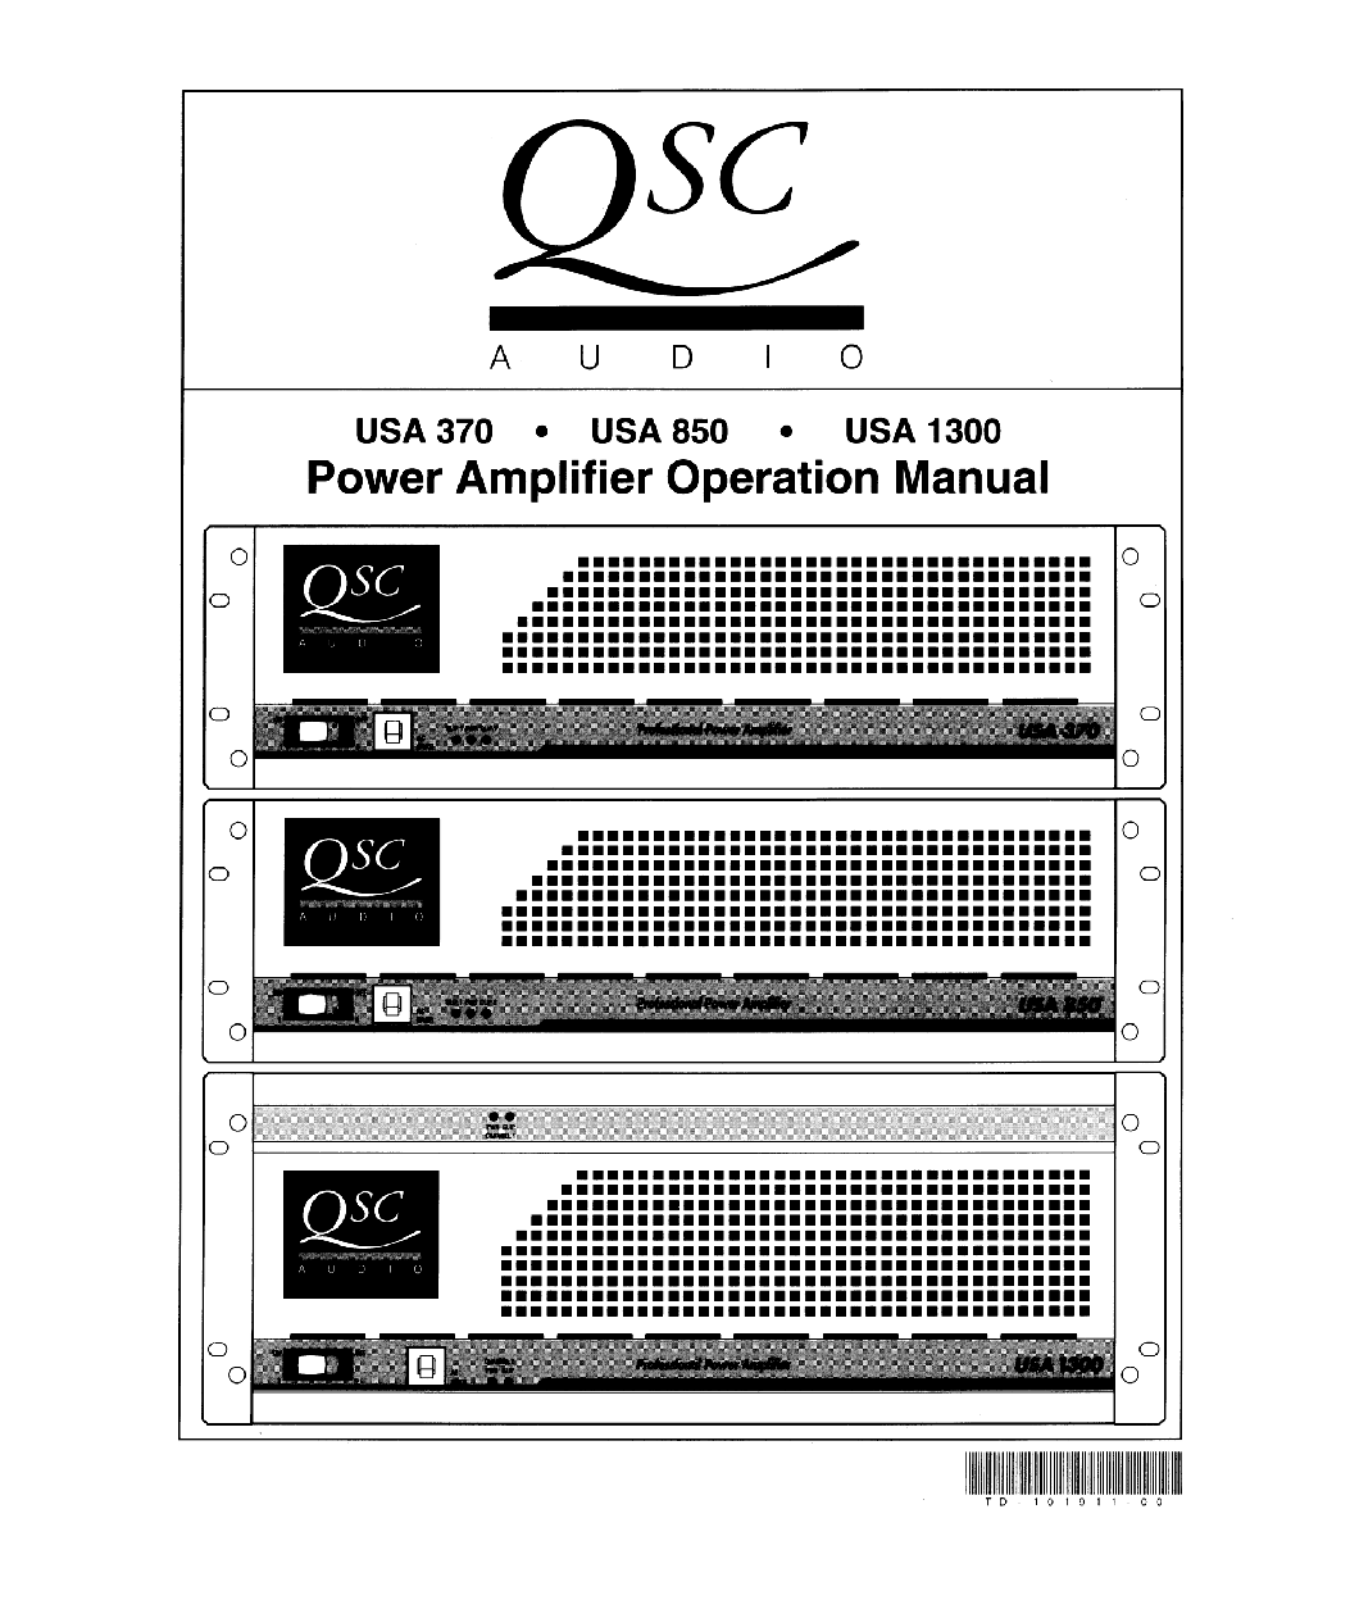 QSC USA 370, USA 850 Owner's Manual